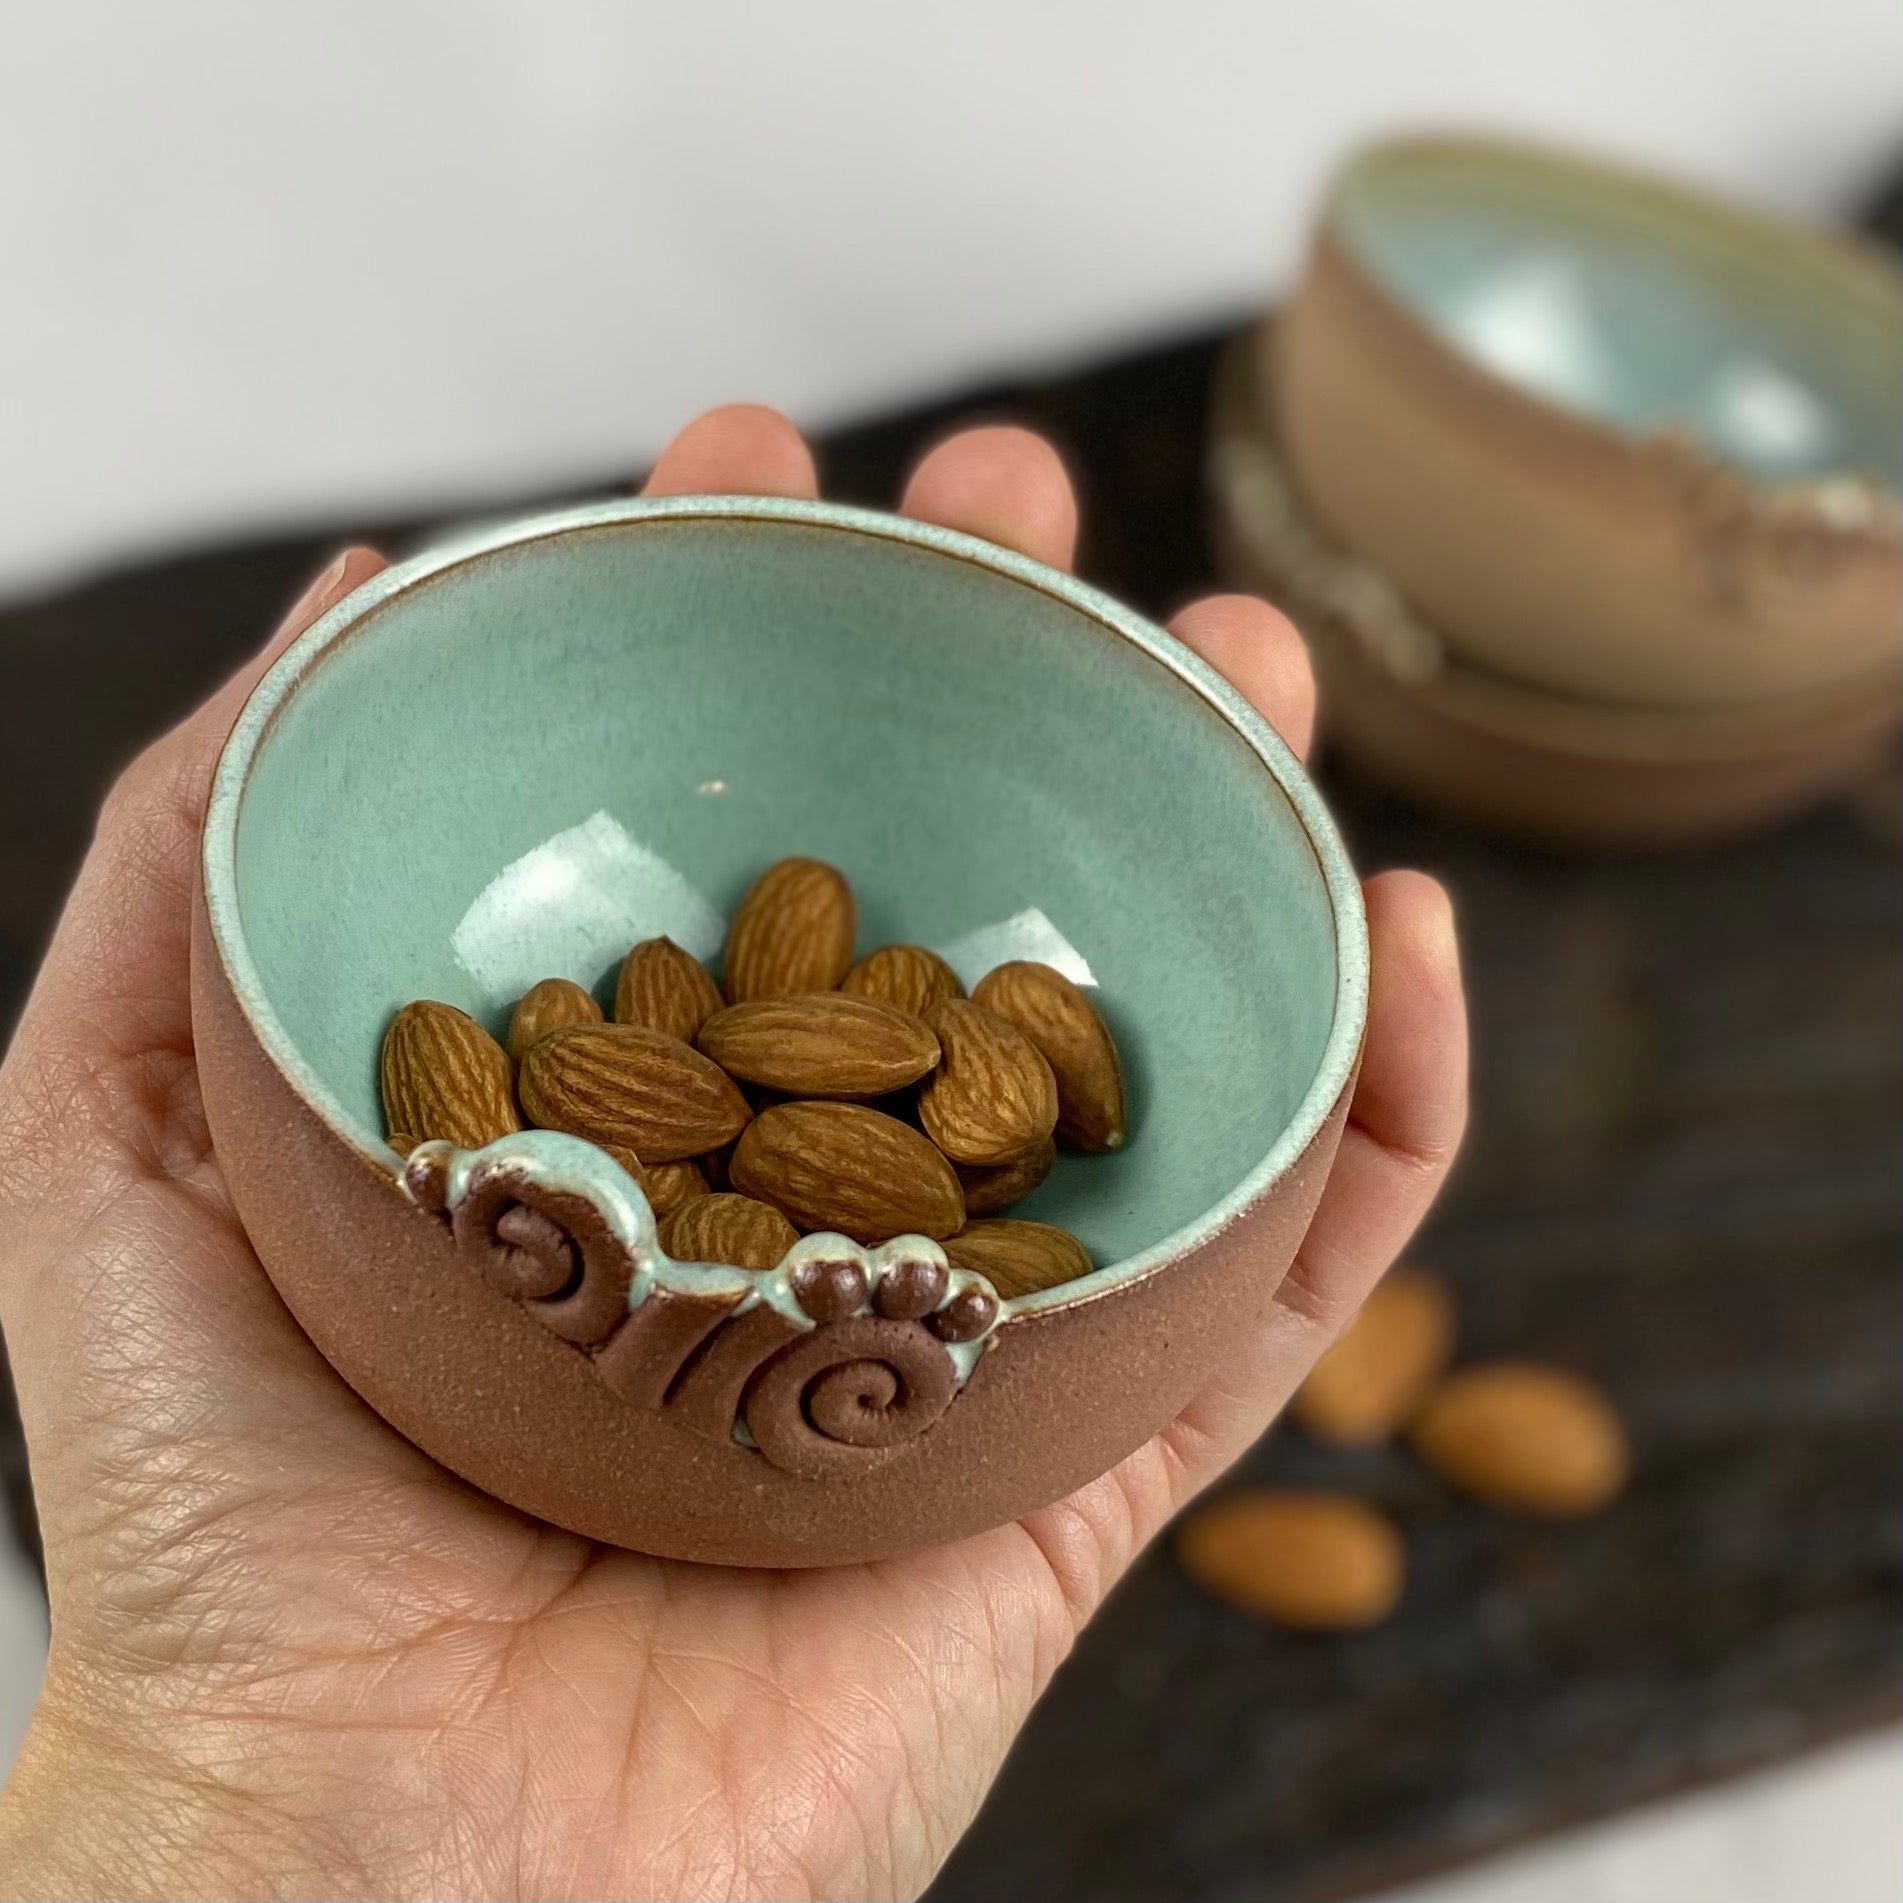 handcrafted snack bowl that fits in your palm